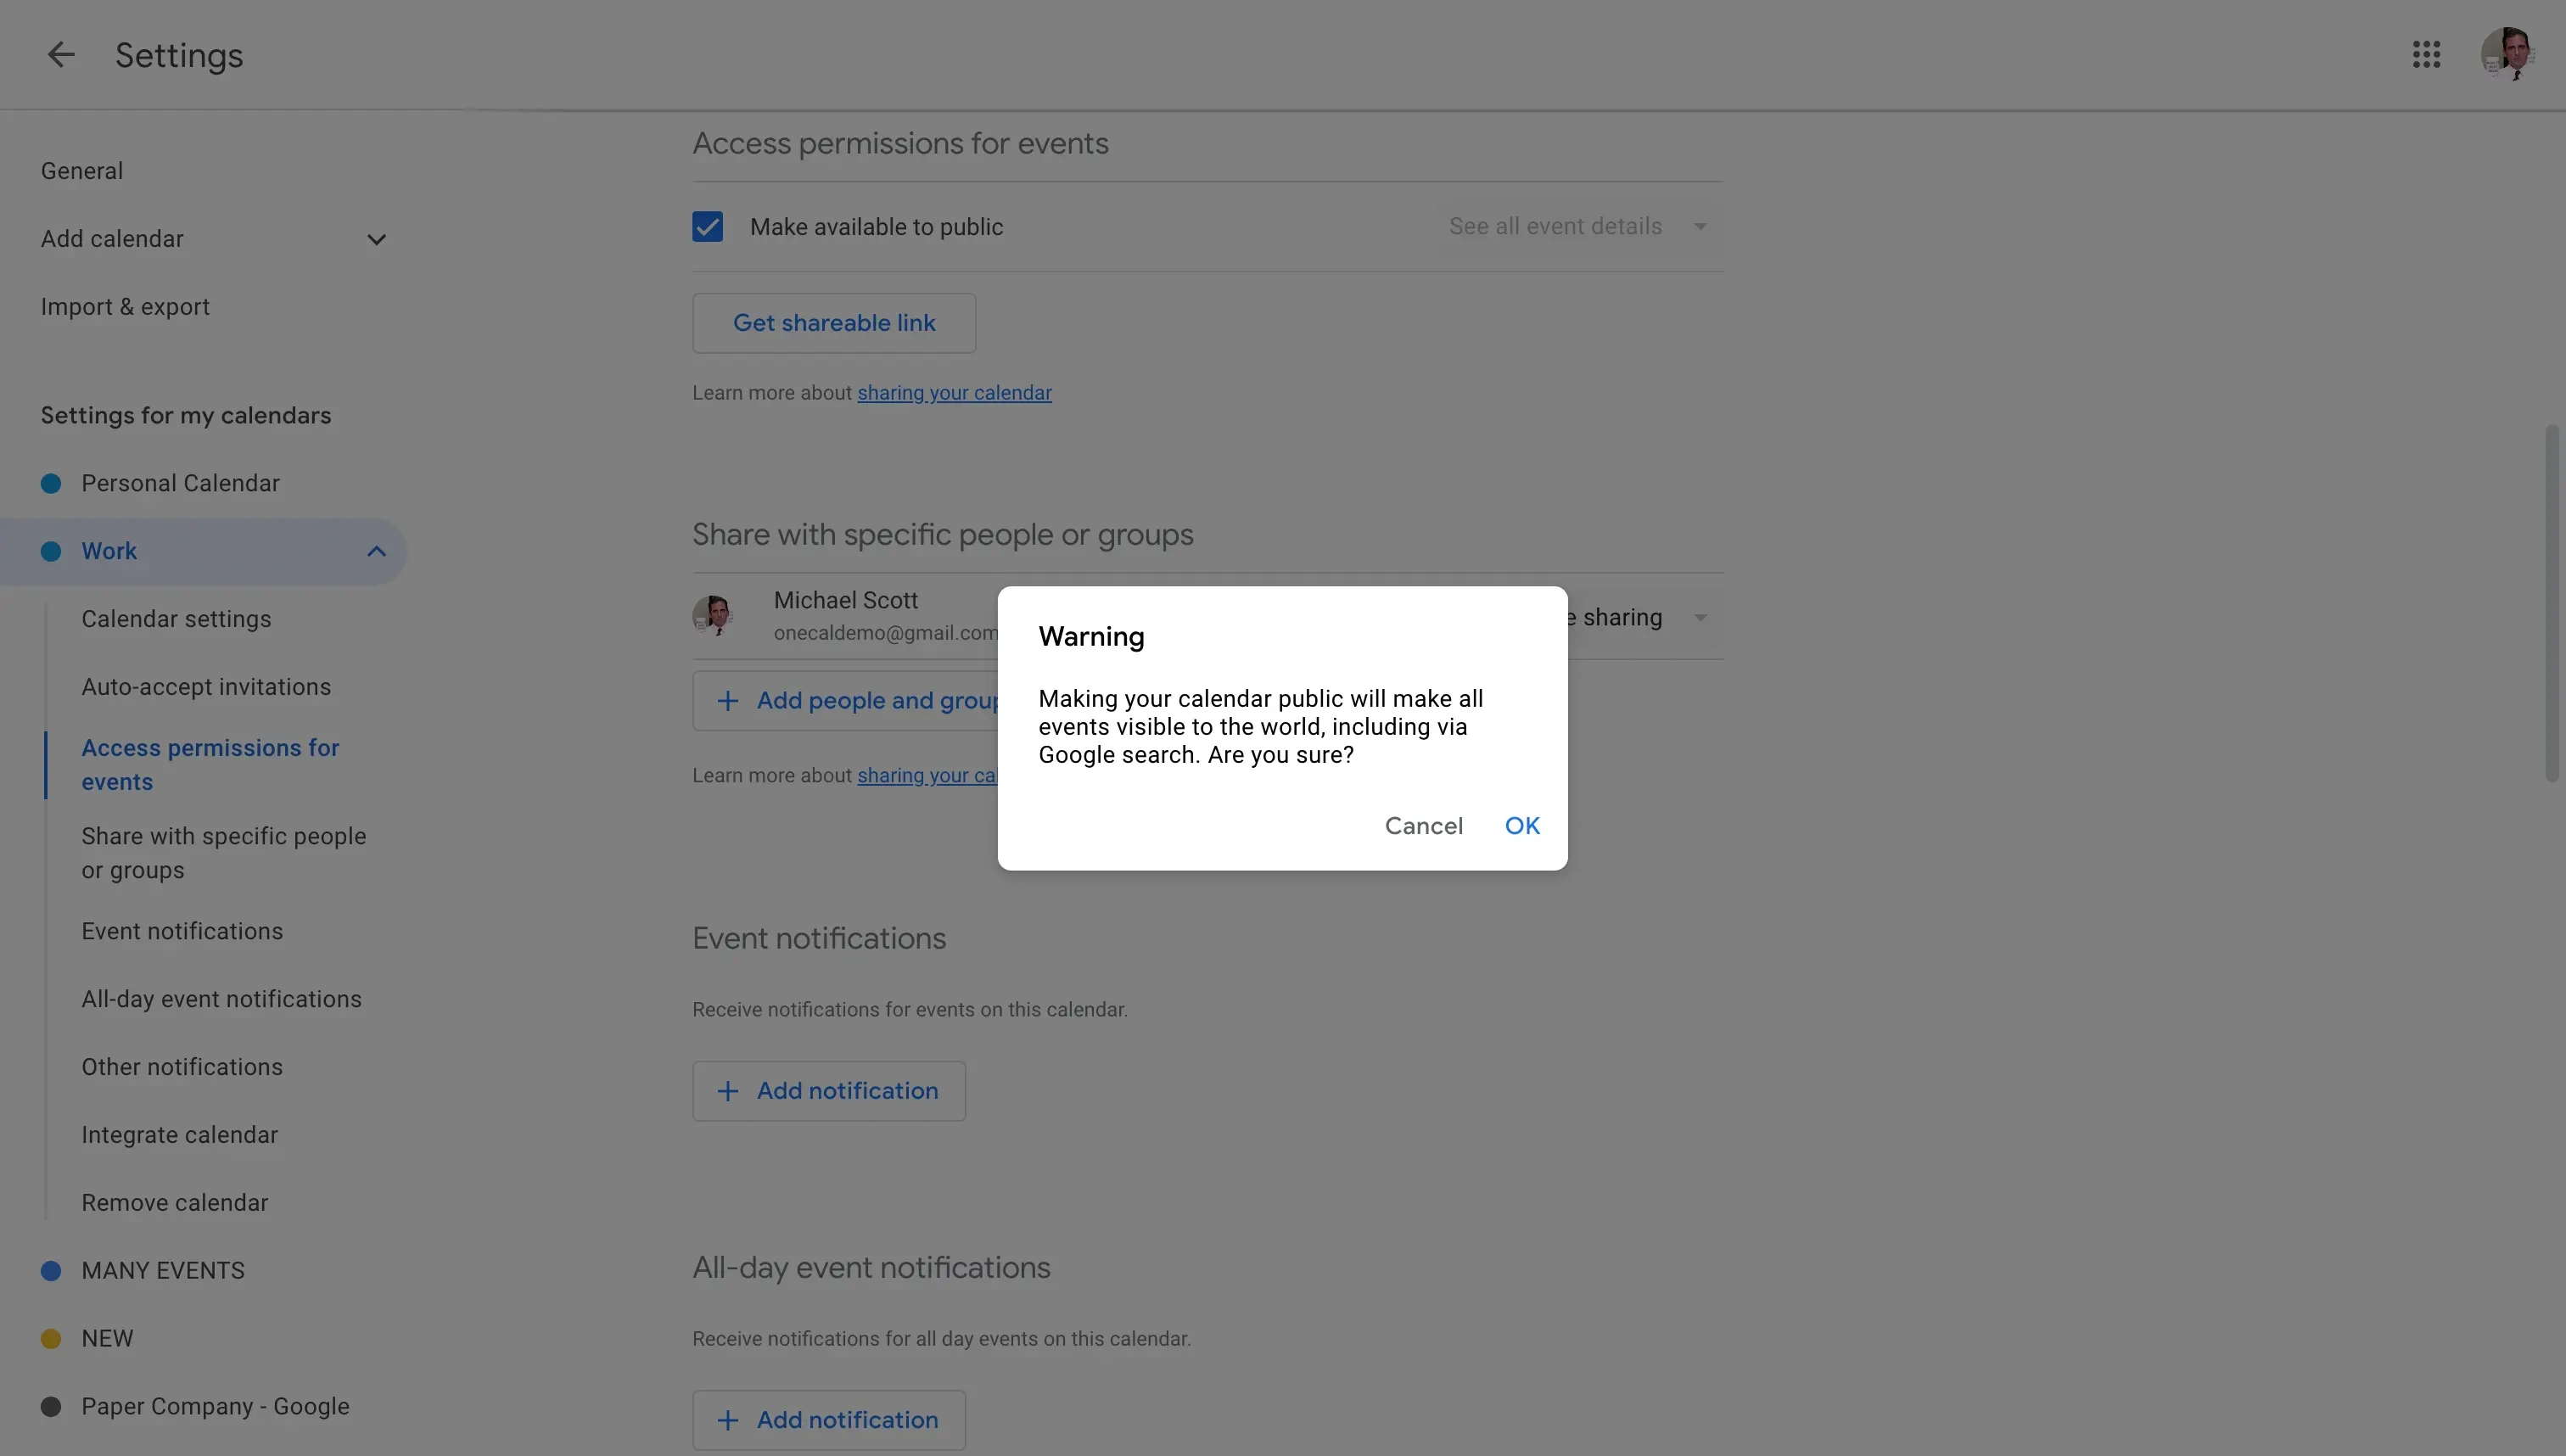 Google Calendar - Confirm that the Google Calendar will be available to the public